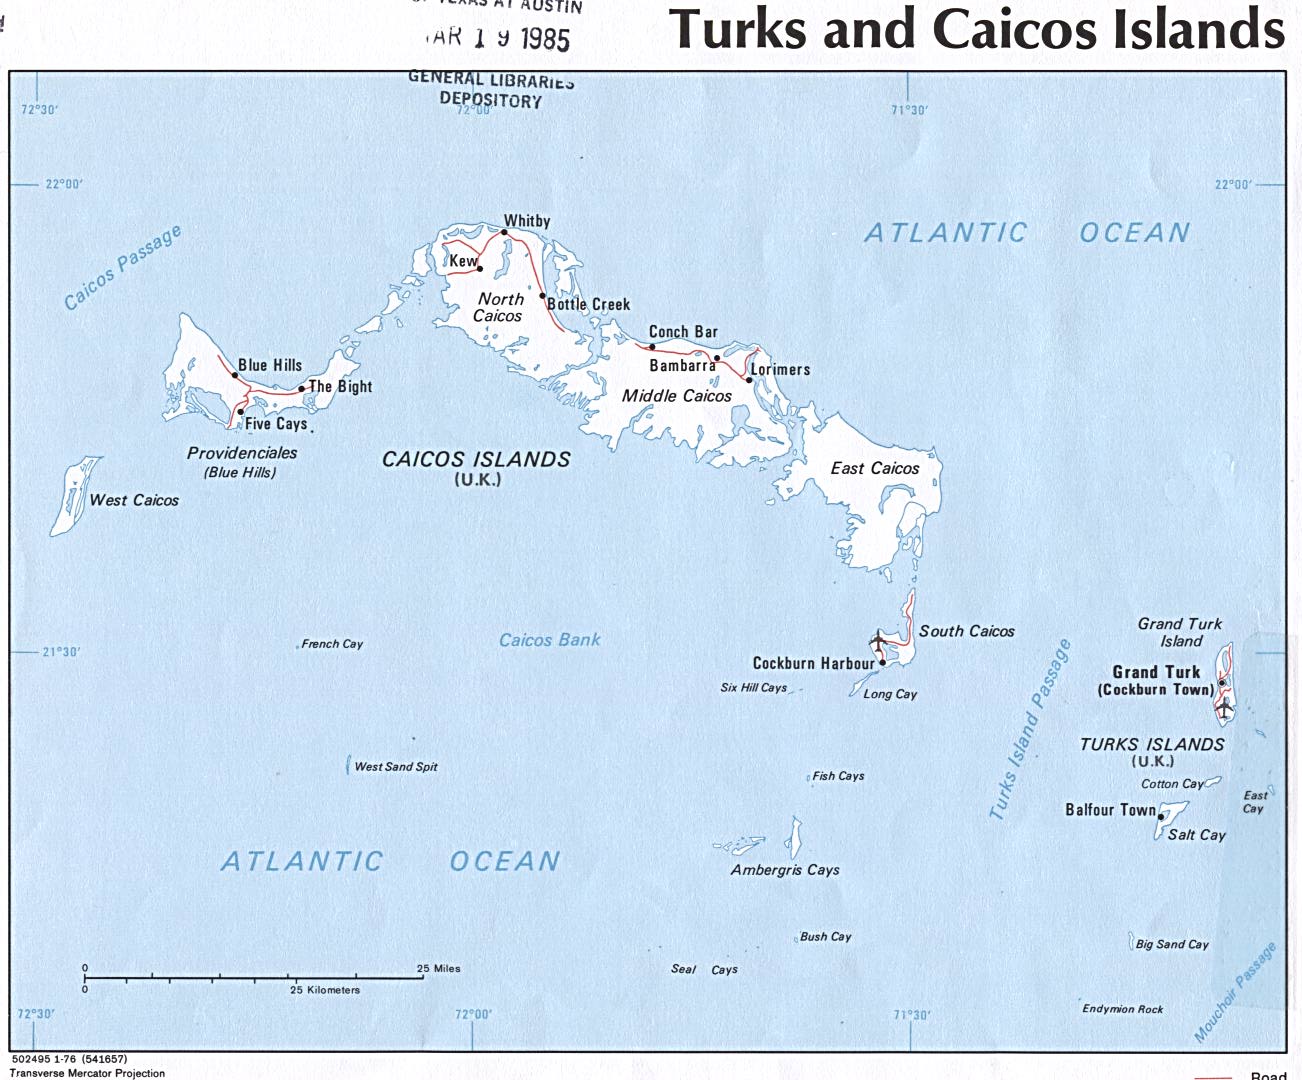 Where are the Turks and Caicos Islands located?